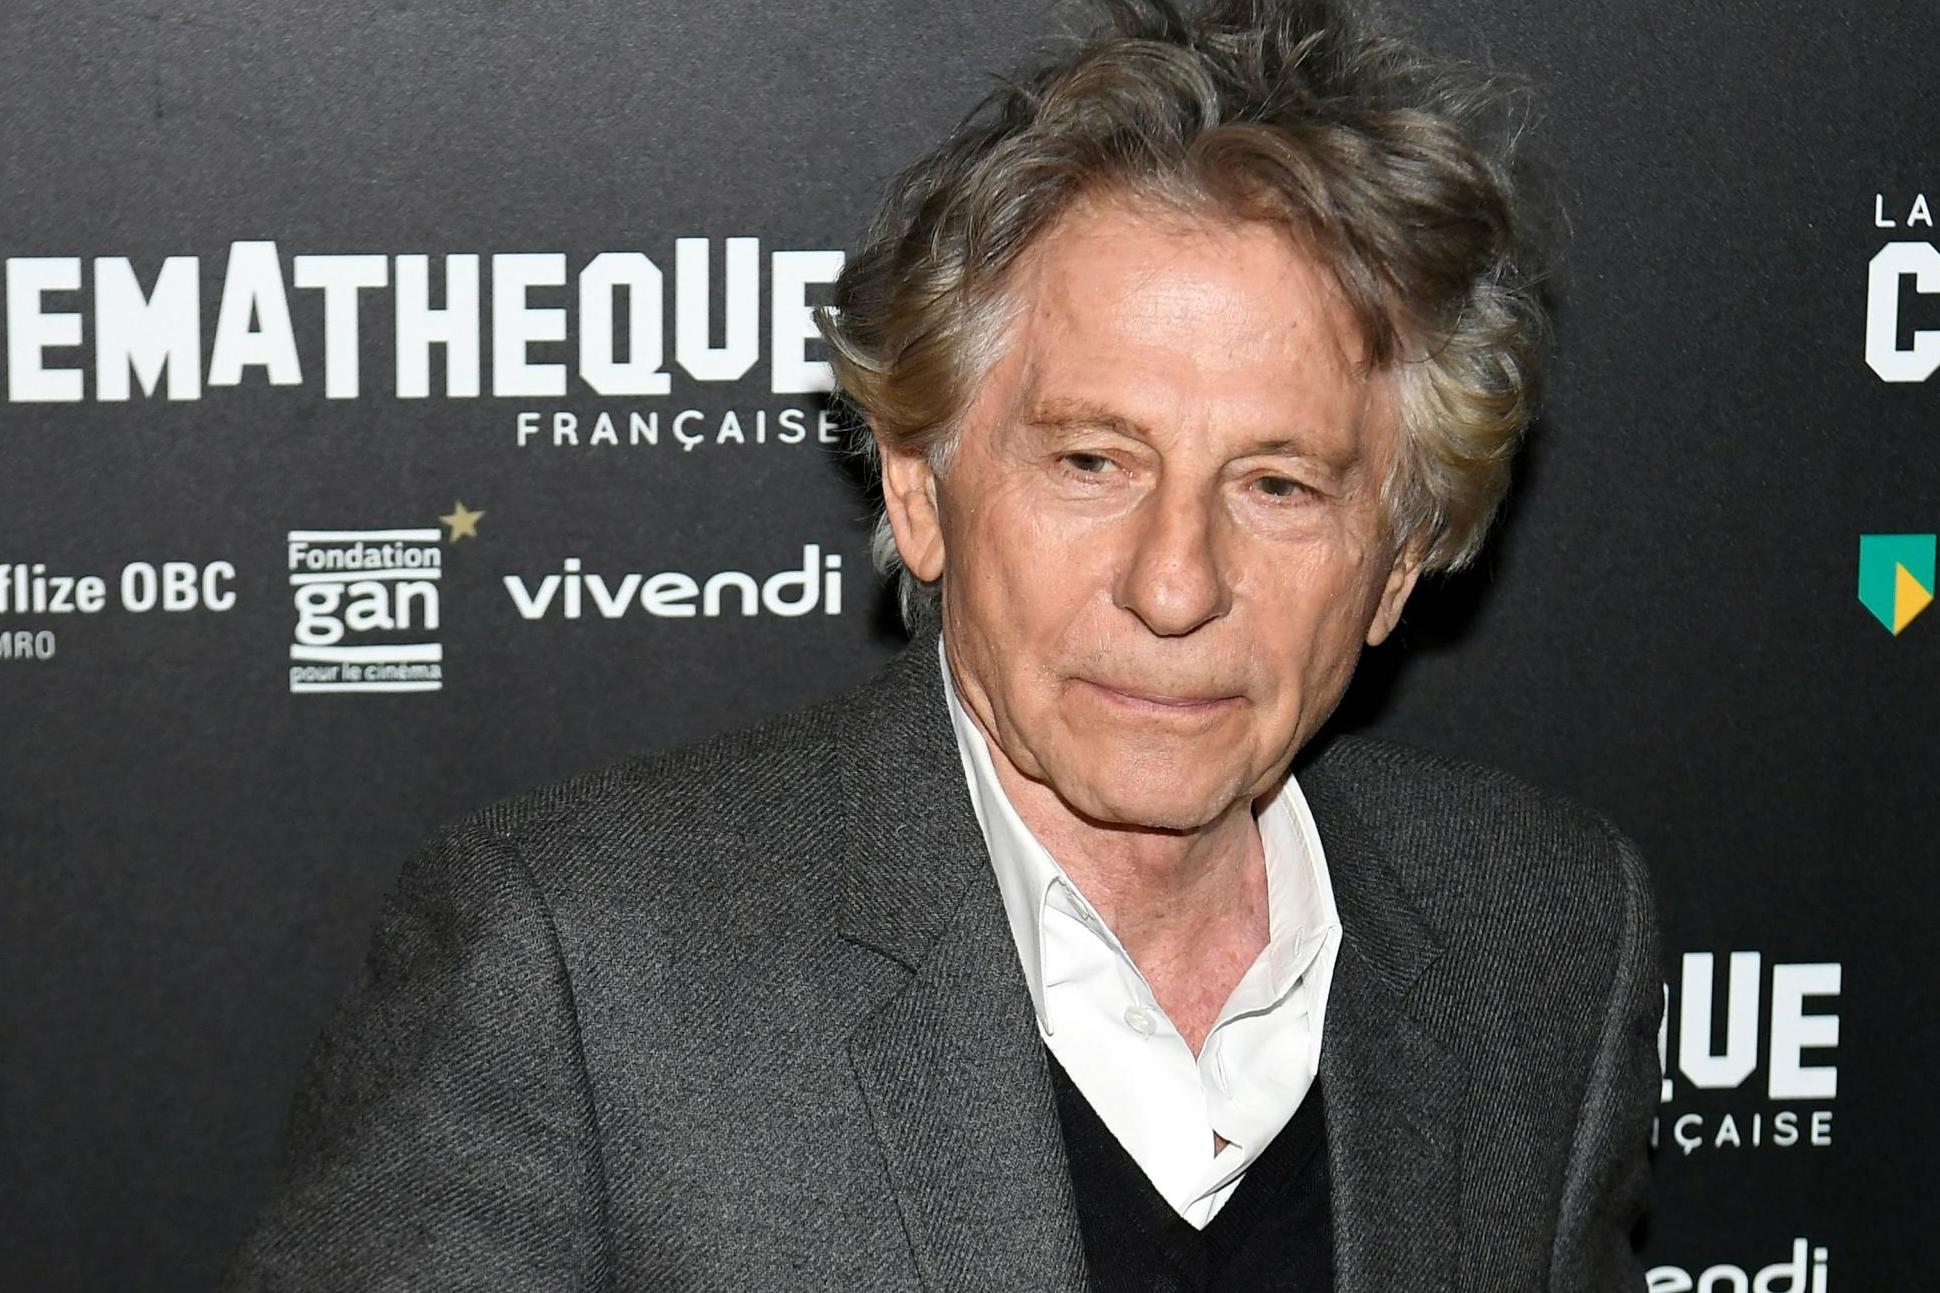 Roman Polanski poses during a photocall at the Cinematheque in Paris on 30 October, 2017.